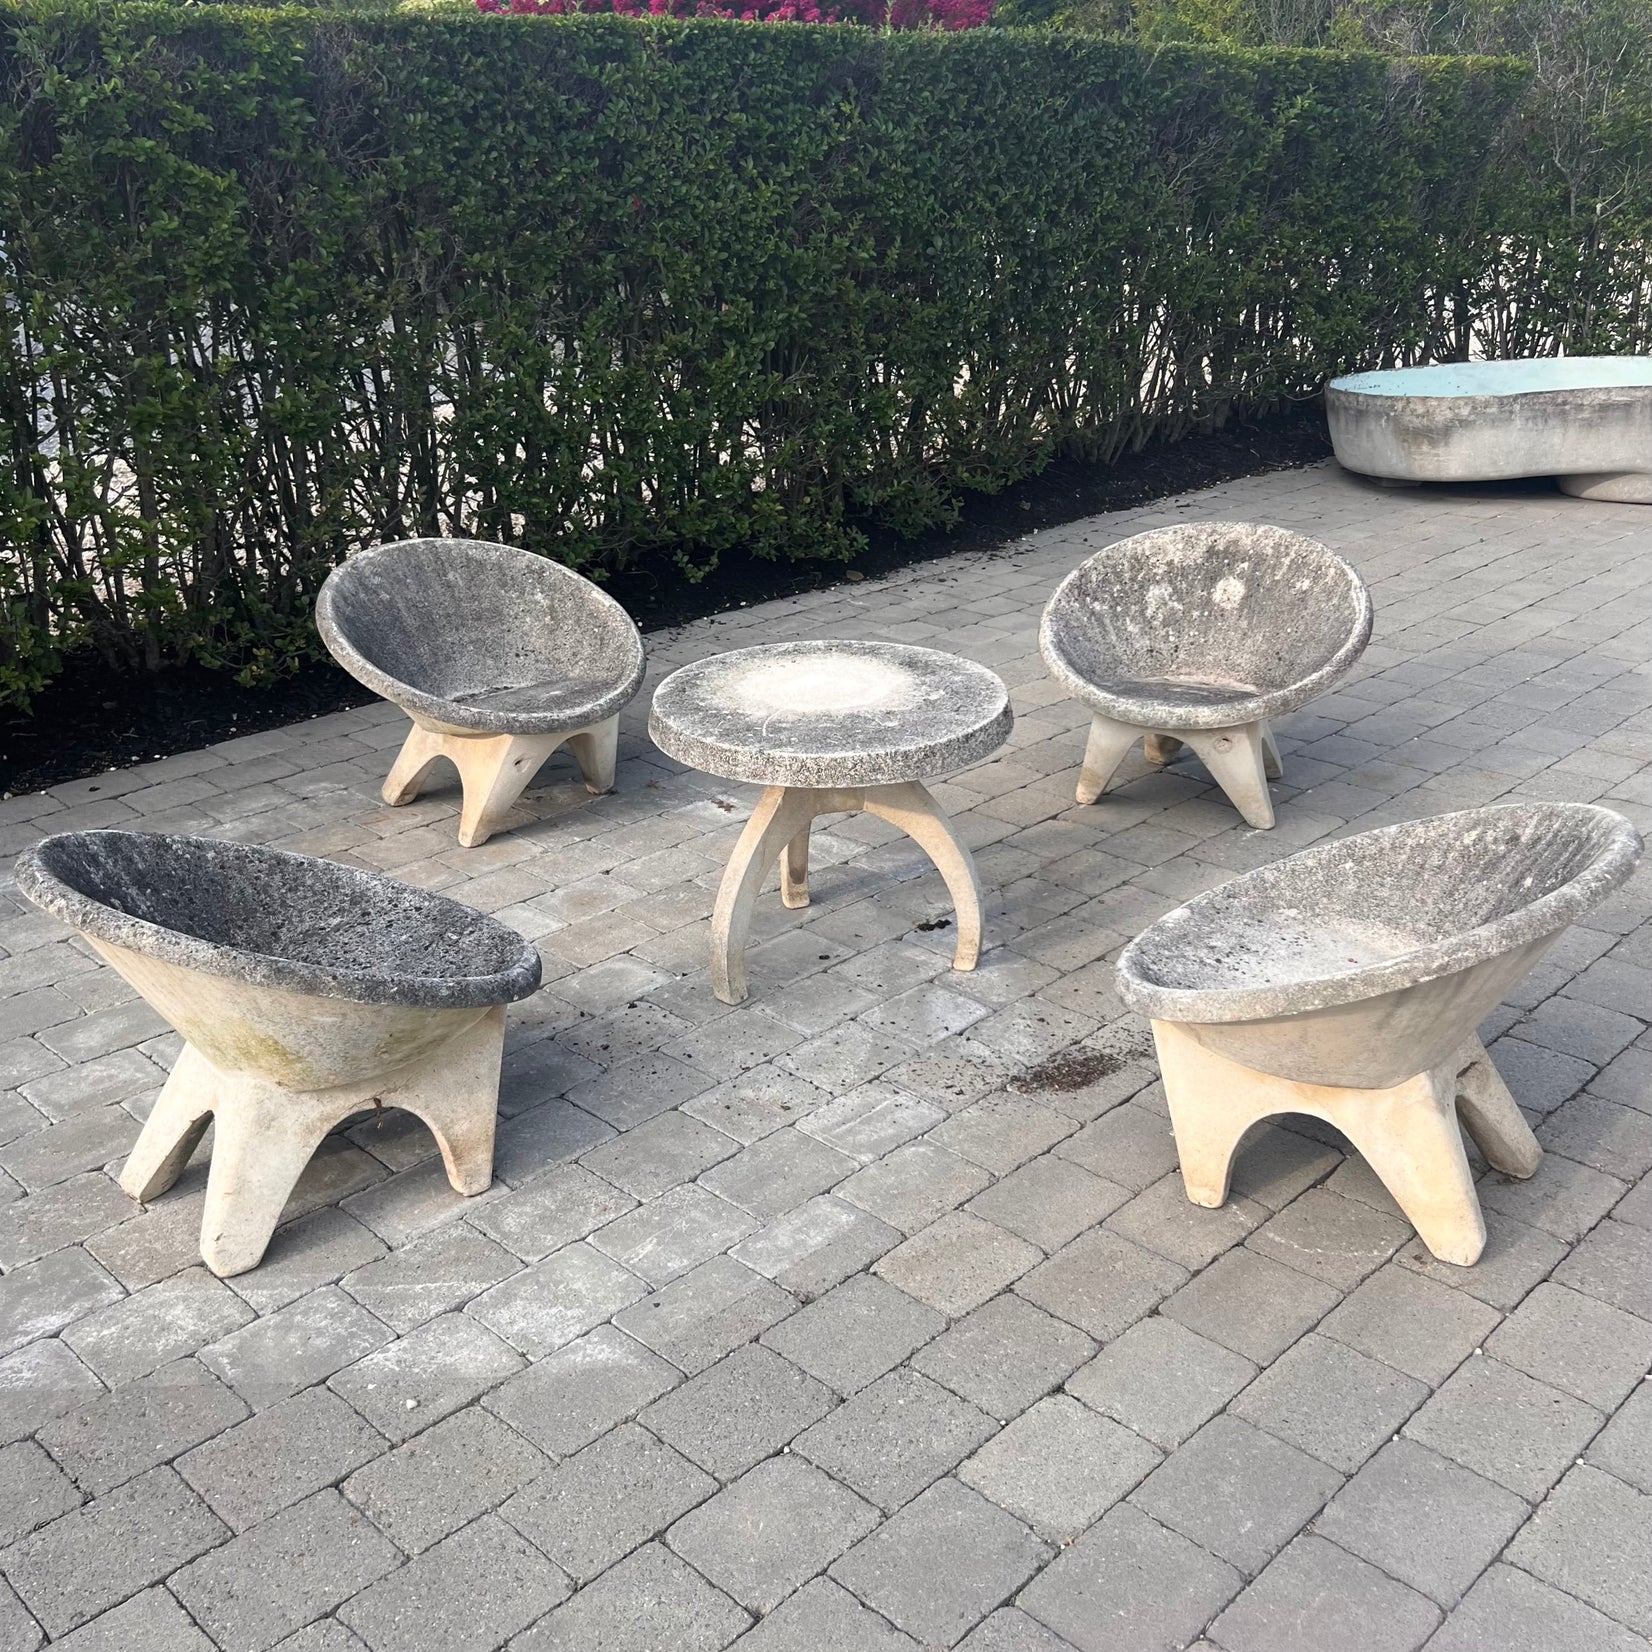 Set of 4 Sculptural Concrete Chairs and Table, 1960s Belgium